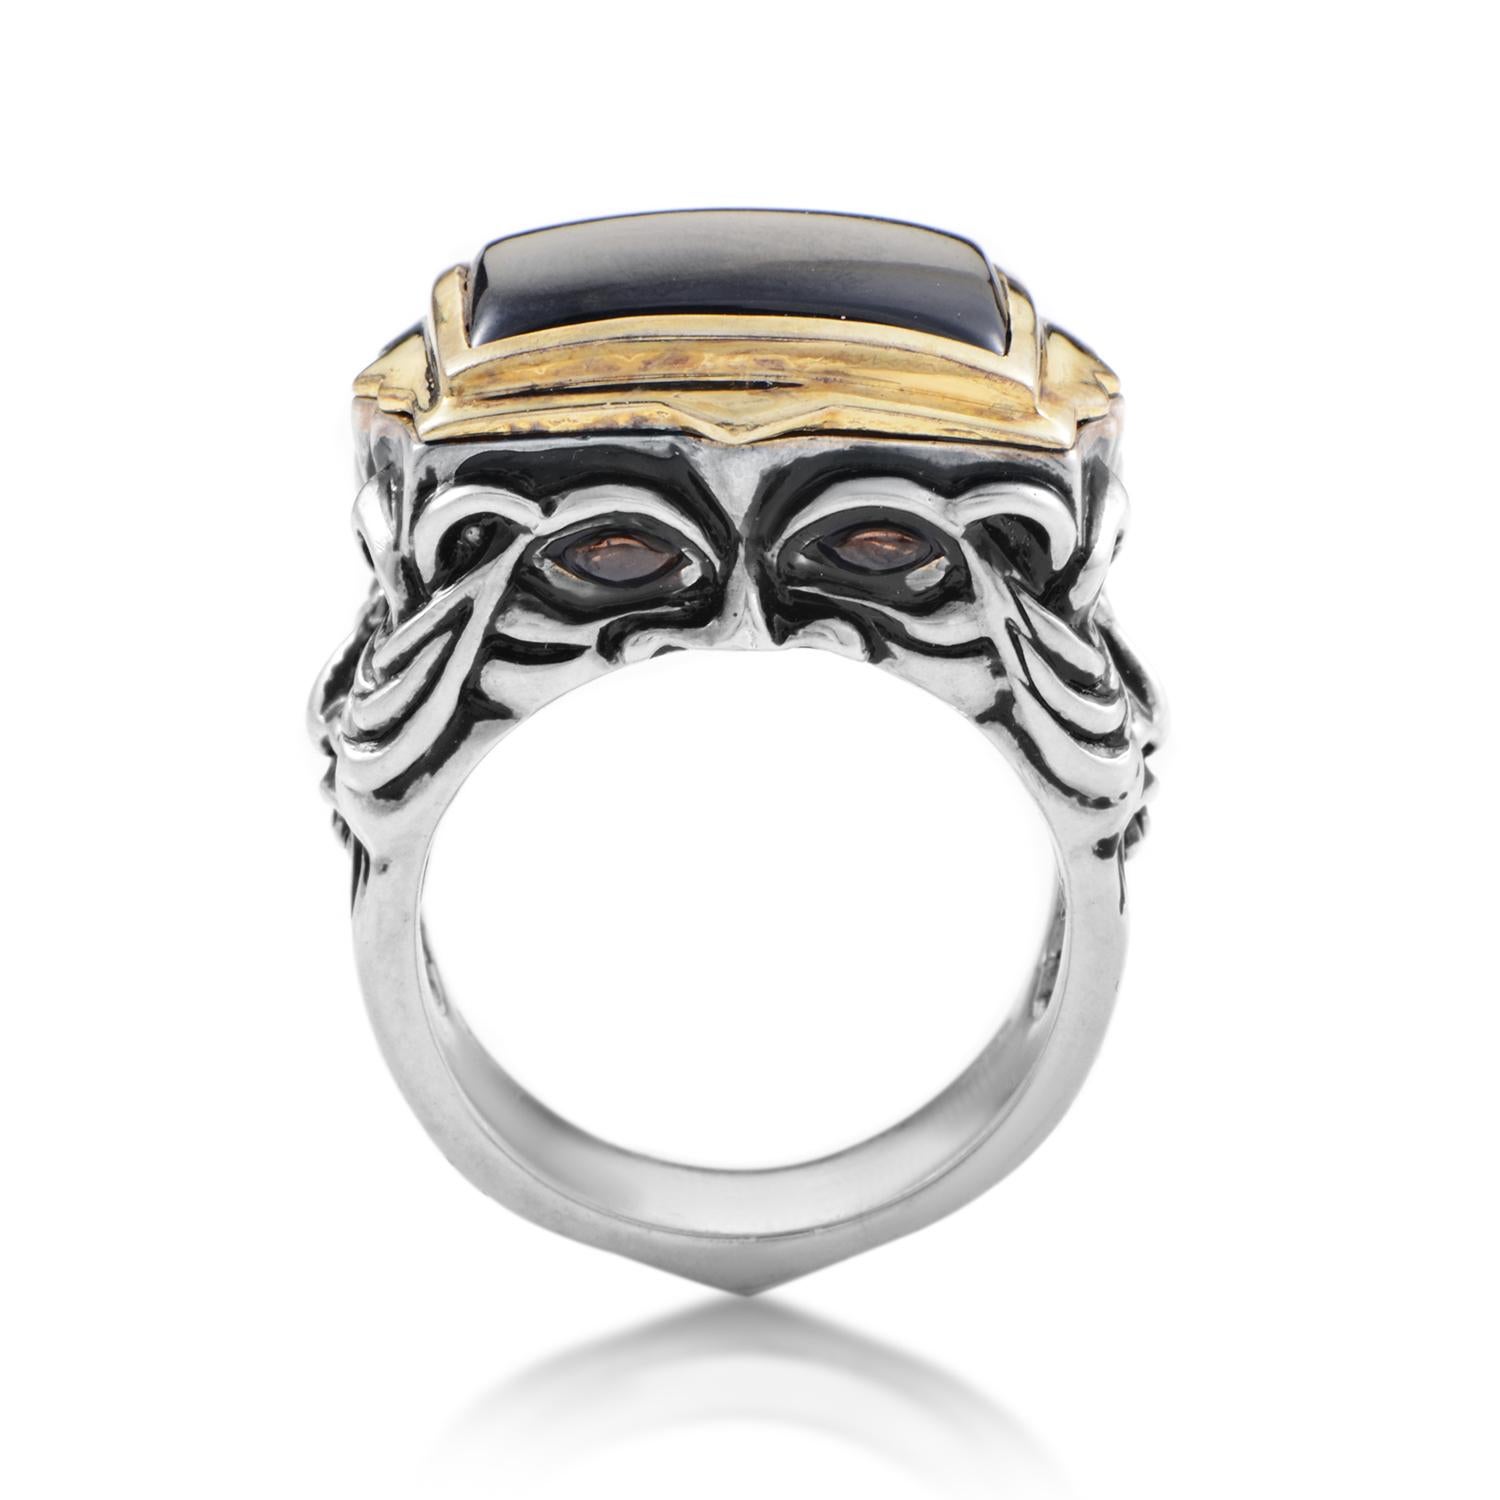 Continuing the esteemed tradition of daring designs with unparalleled aesthetic and artistic value, Stephen Webster presents this outstanding ring made of marvelously ornamented silver and adorned with captivating black jade and splendid garnet
Ring